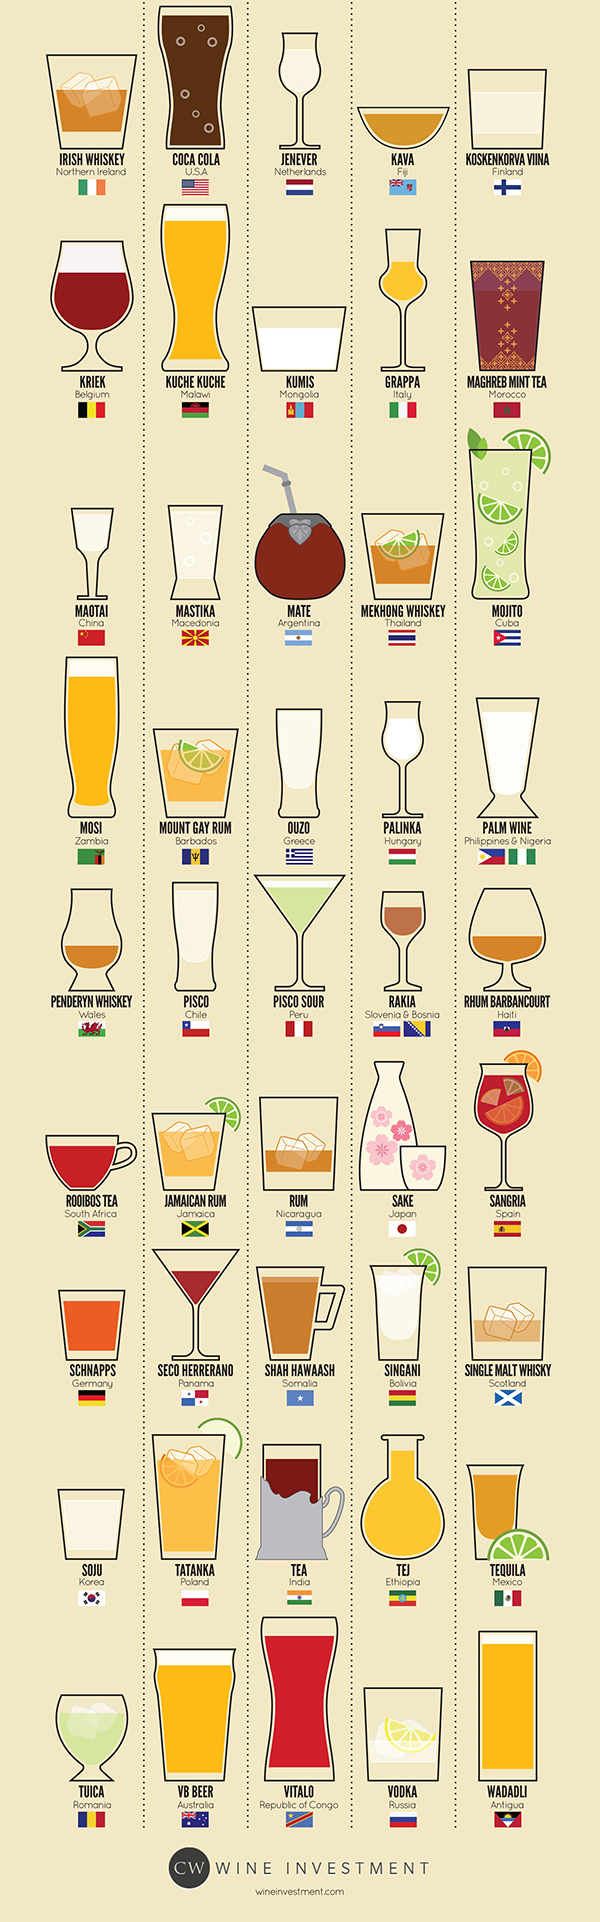 Around-the-world-in-80-drinks-infographic